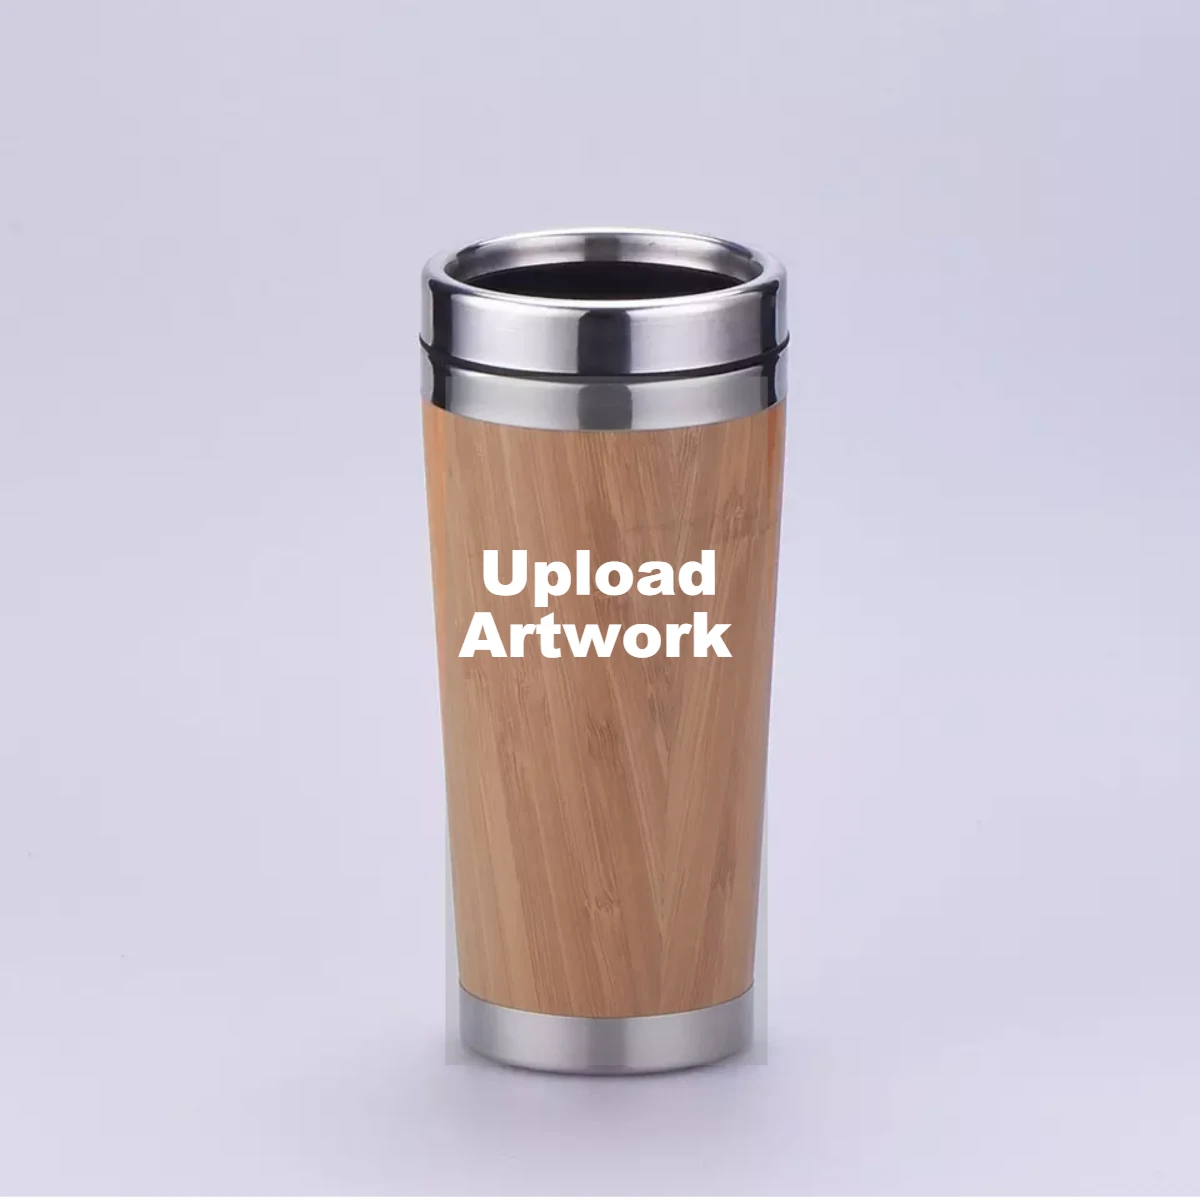 WB Eco-Friendly Product Double Wall Bamboo Fiber Coffee Tumbler Wholesale Coffee Drink New Travel Mug Insulated Bamboo Tumbler